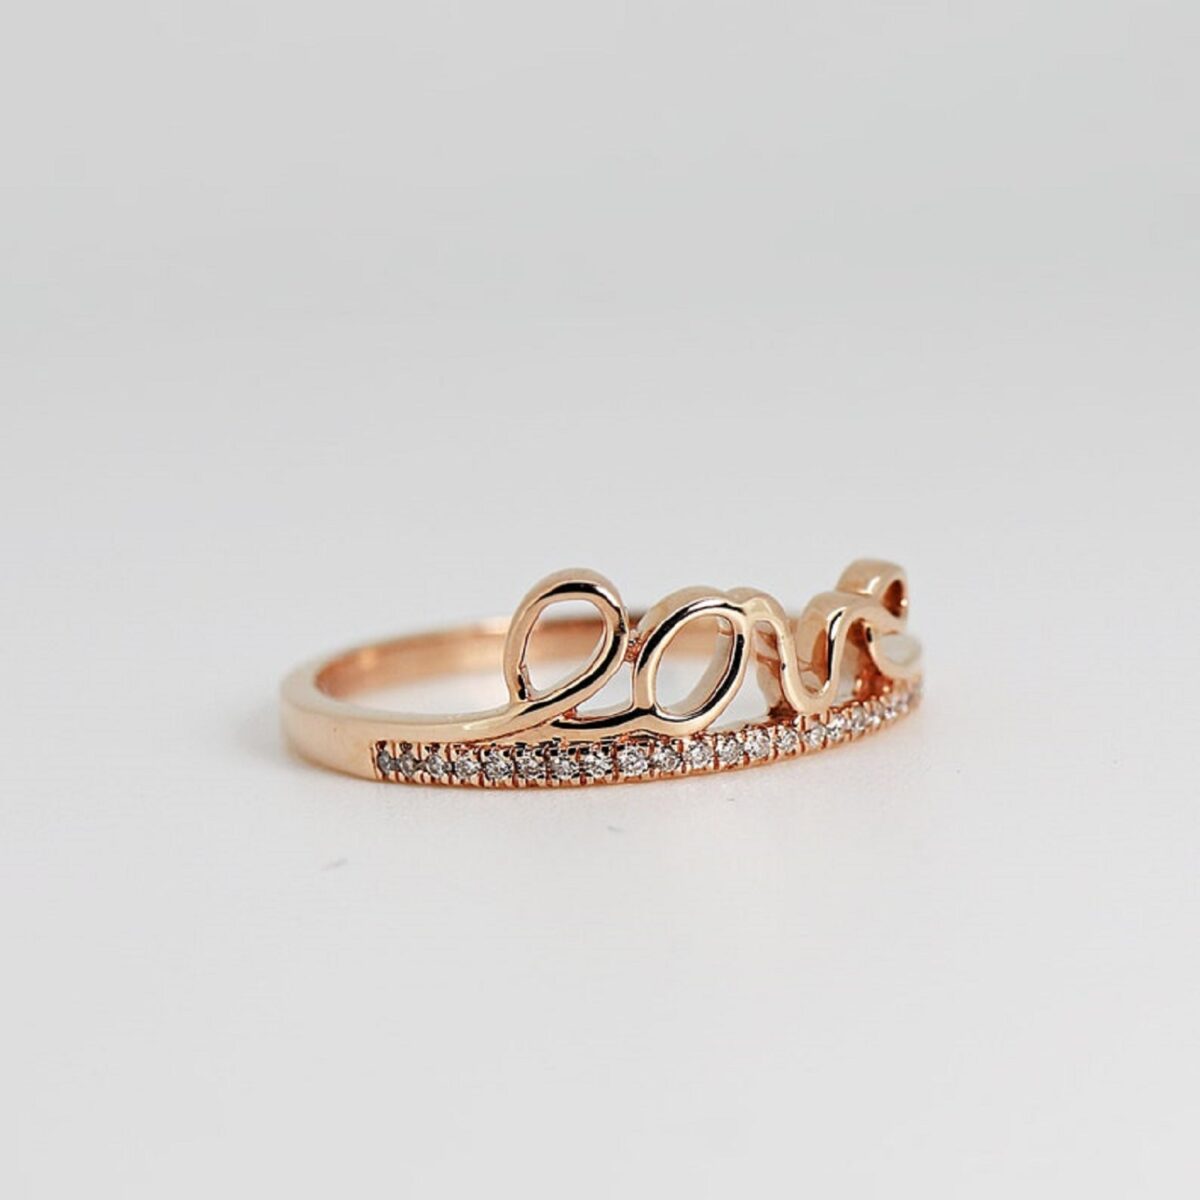 "Love" write lab grown diamond statement ring crafted in 14k rose gold